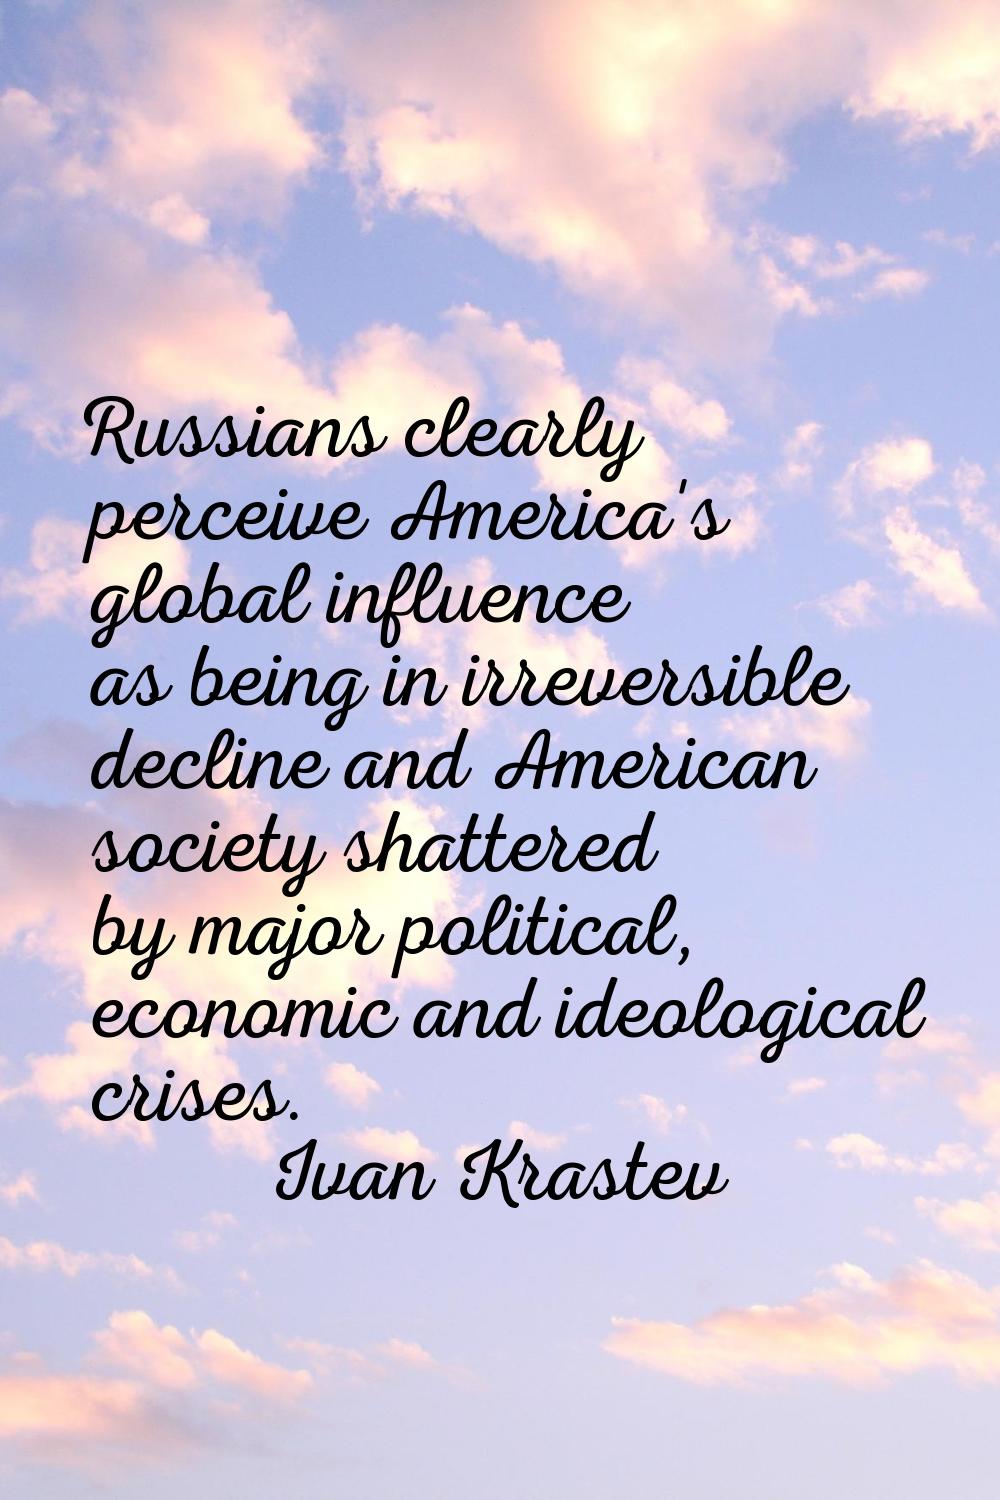 Russians clearly perceive America's global influence as being in irreversible decline and American 